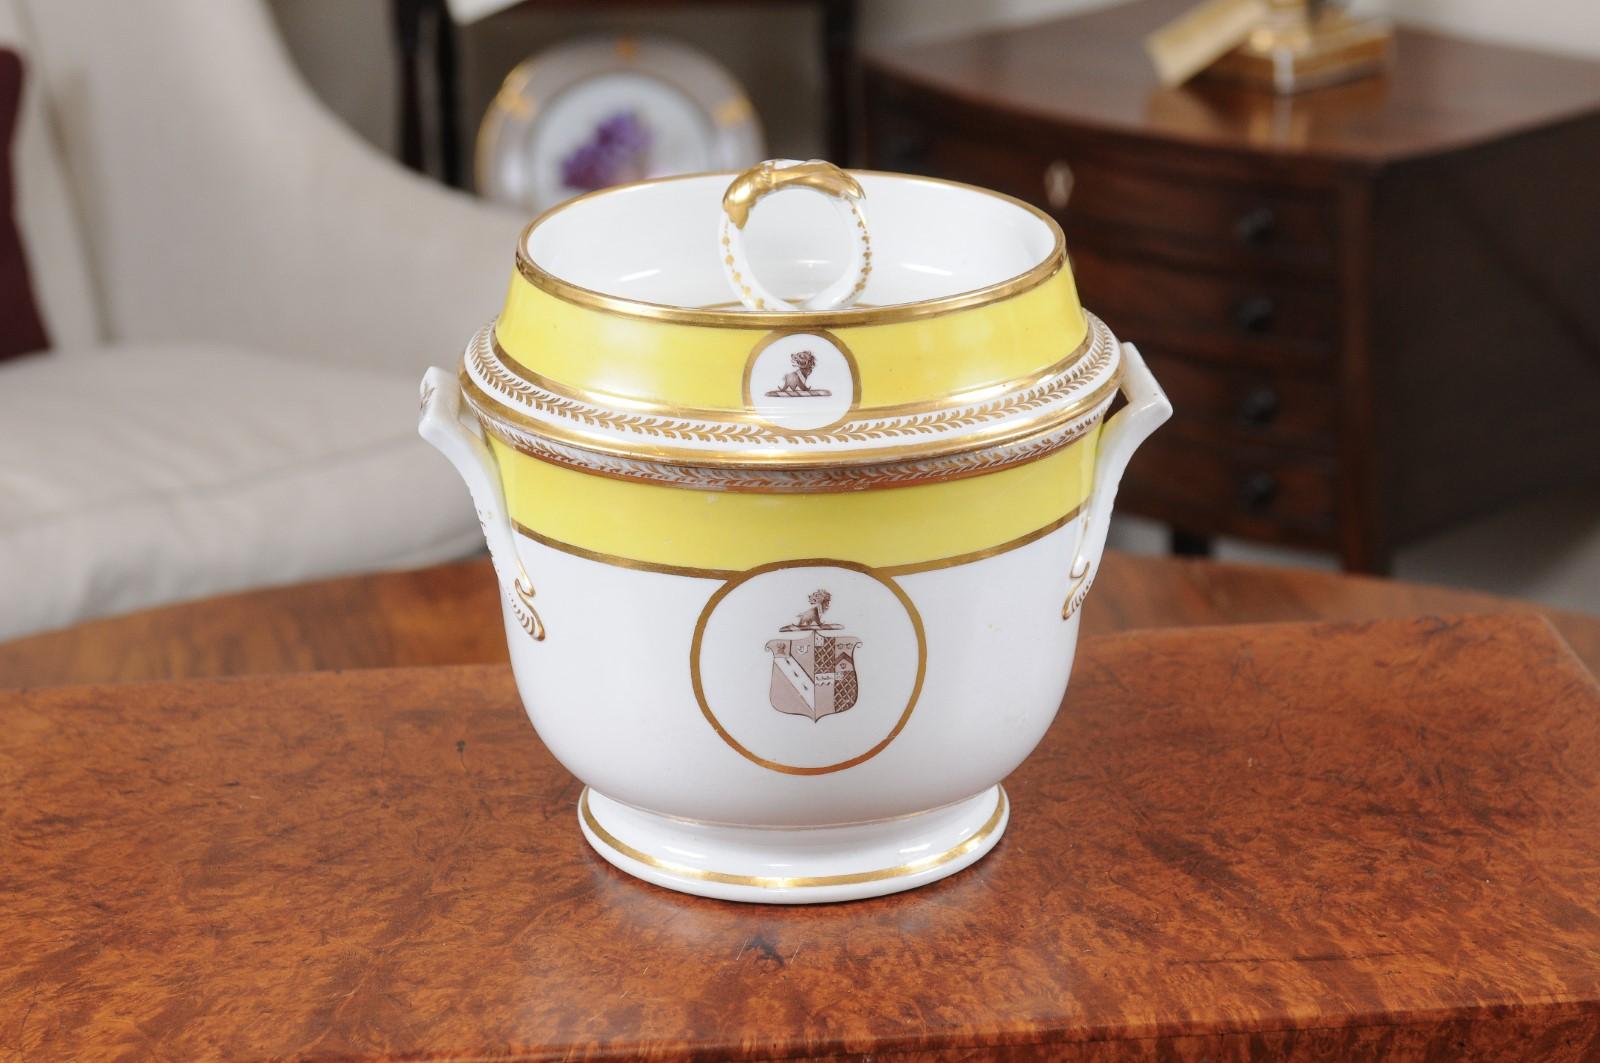  19th Century English Porcelain Armorial Fruit Cooler with Yellow Band 1